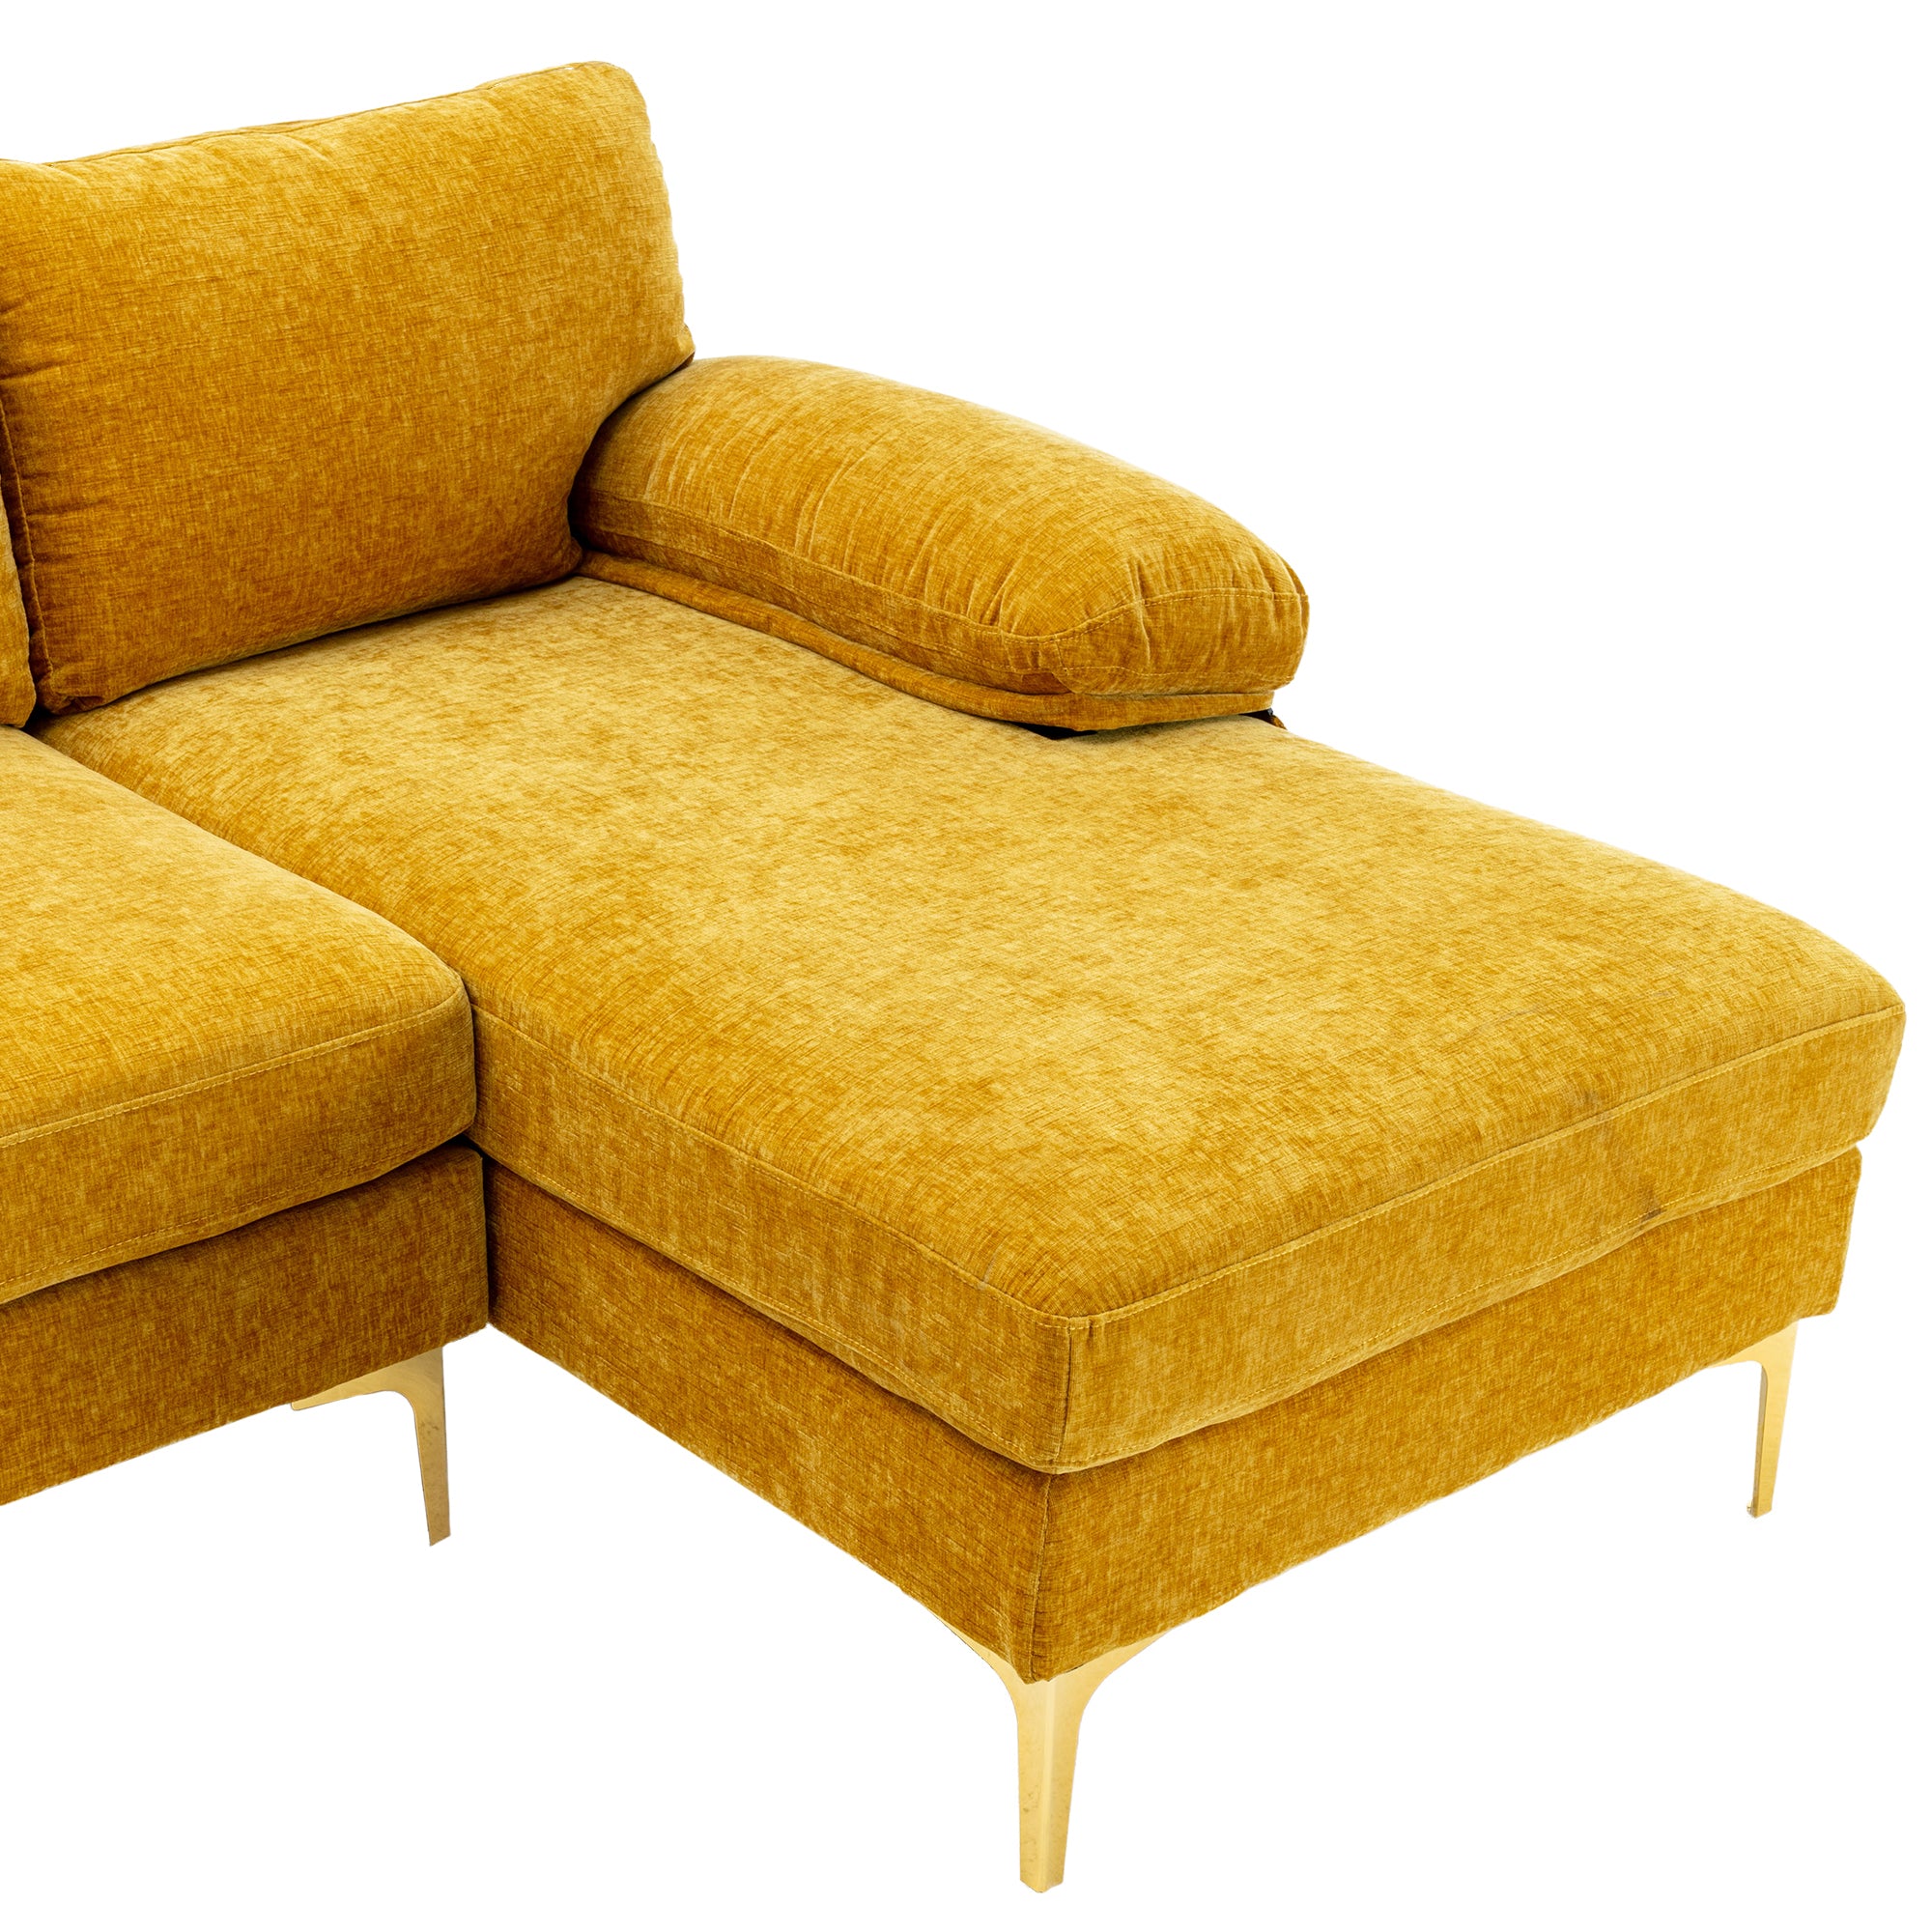 Living Room Sectional Sofa, Musterd Yellow